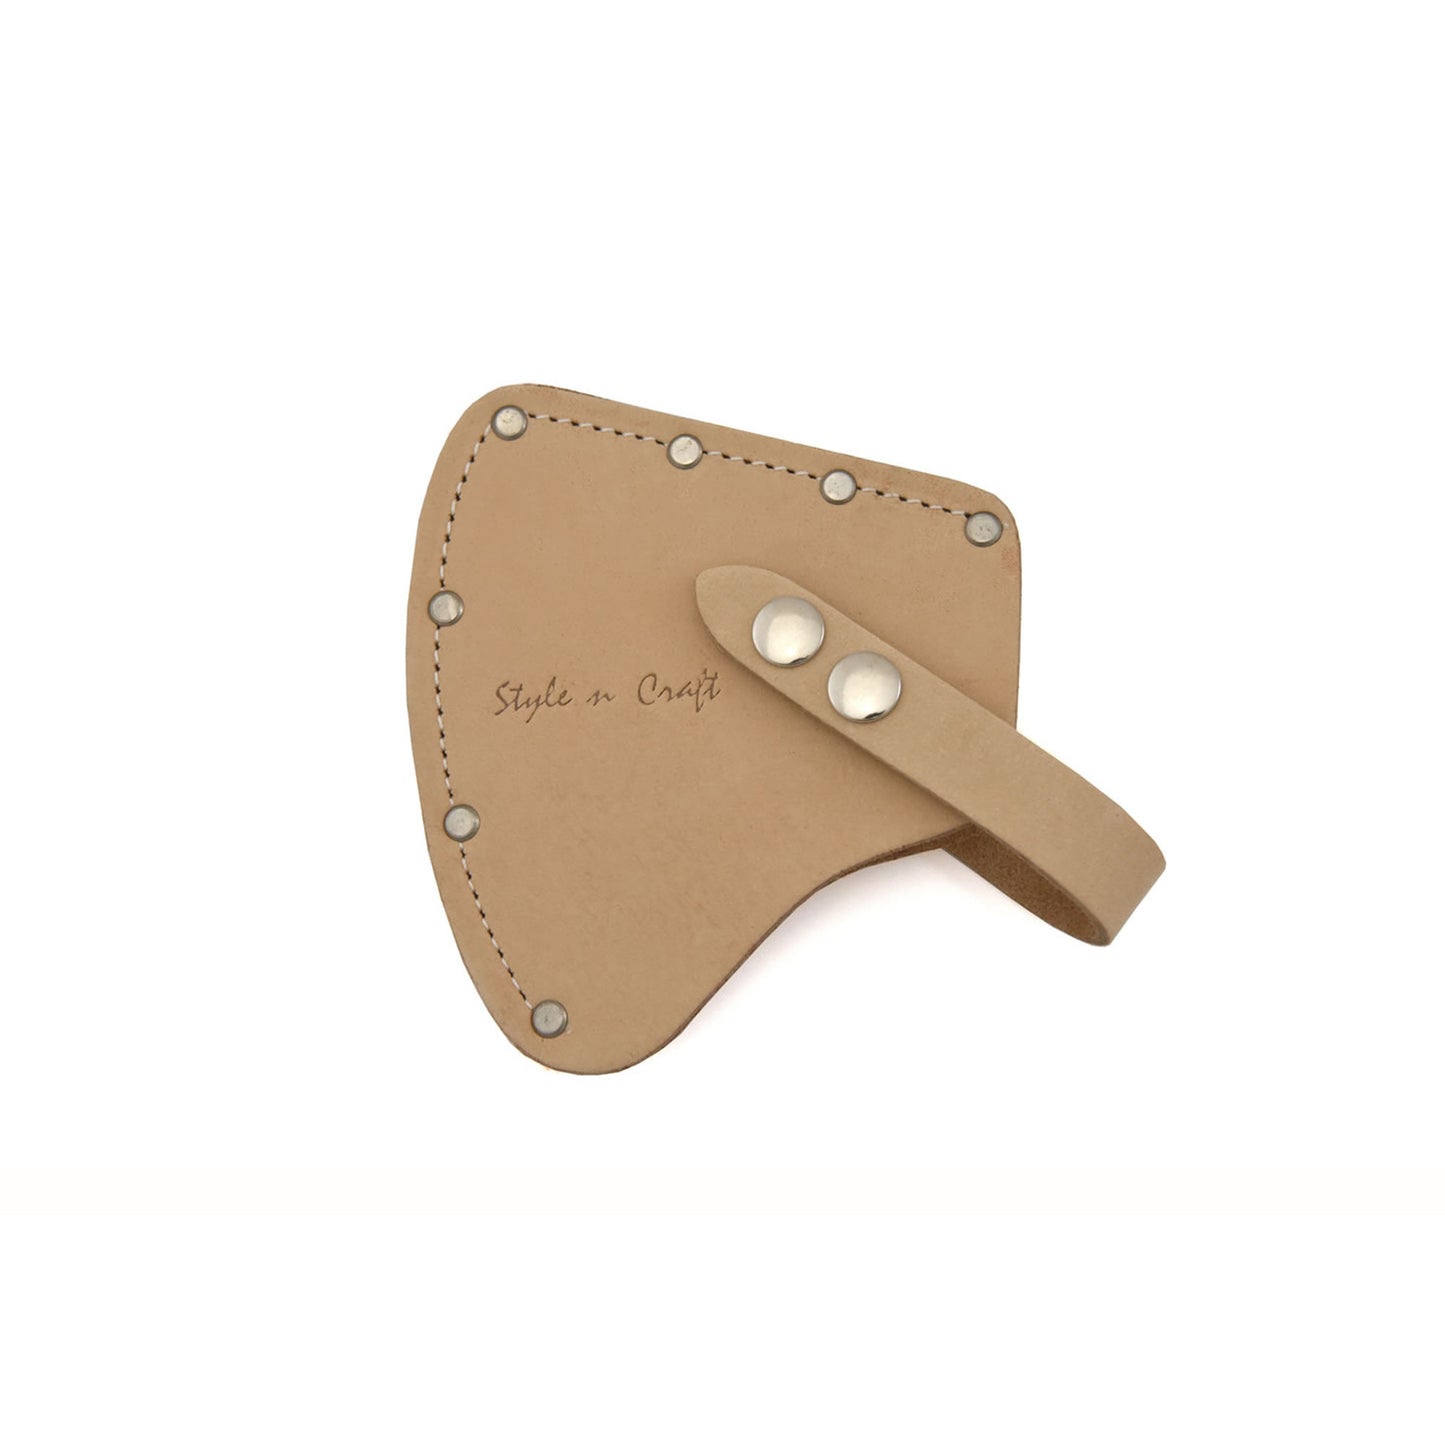 Style n Craft 94027 - Camper's Axe Sheath / Axe Cover in Heavy Top Grain Leather in Natural Color - Image 2